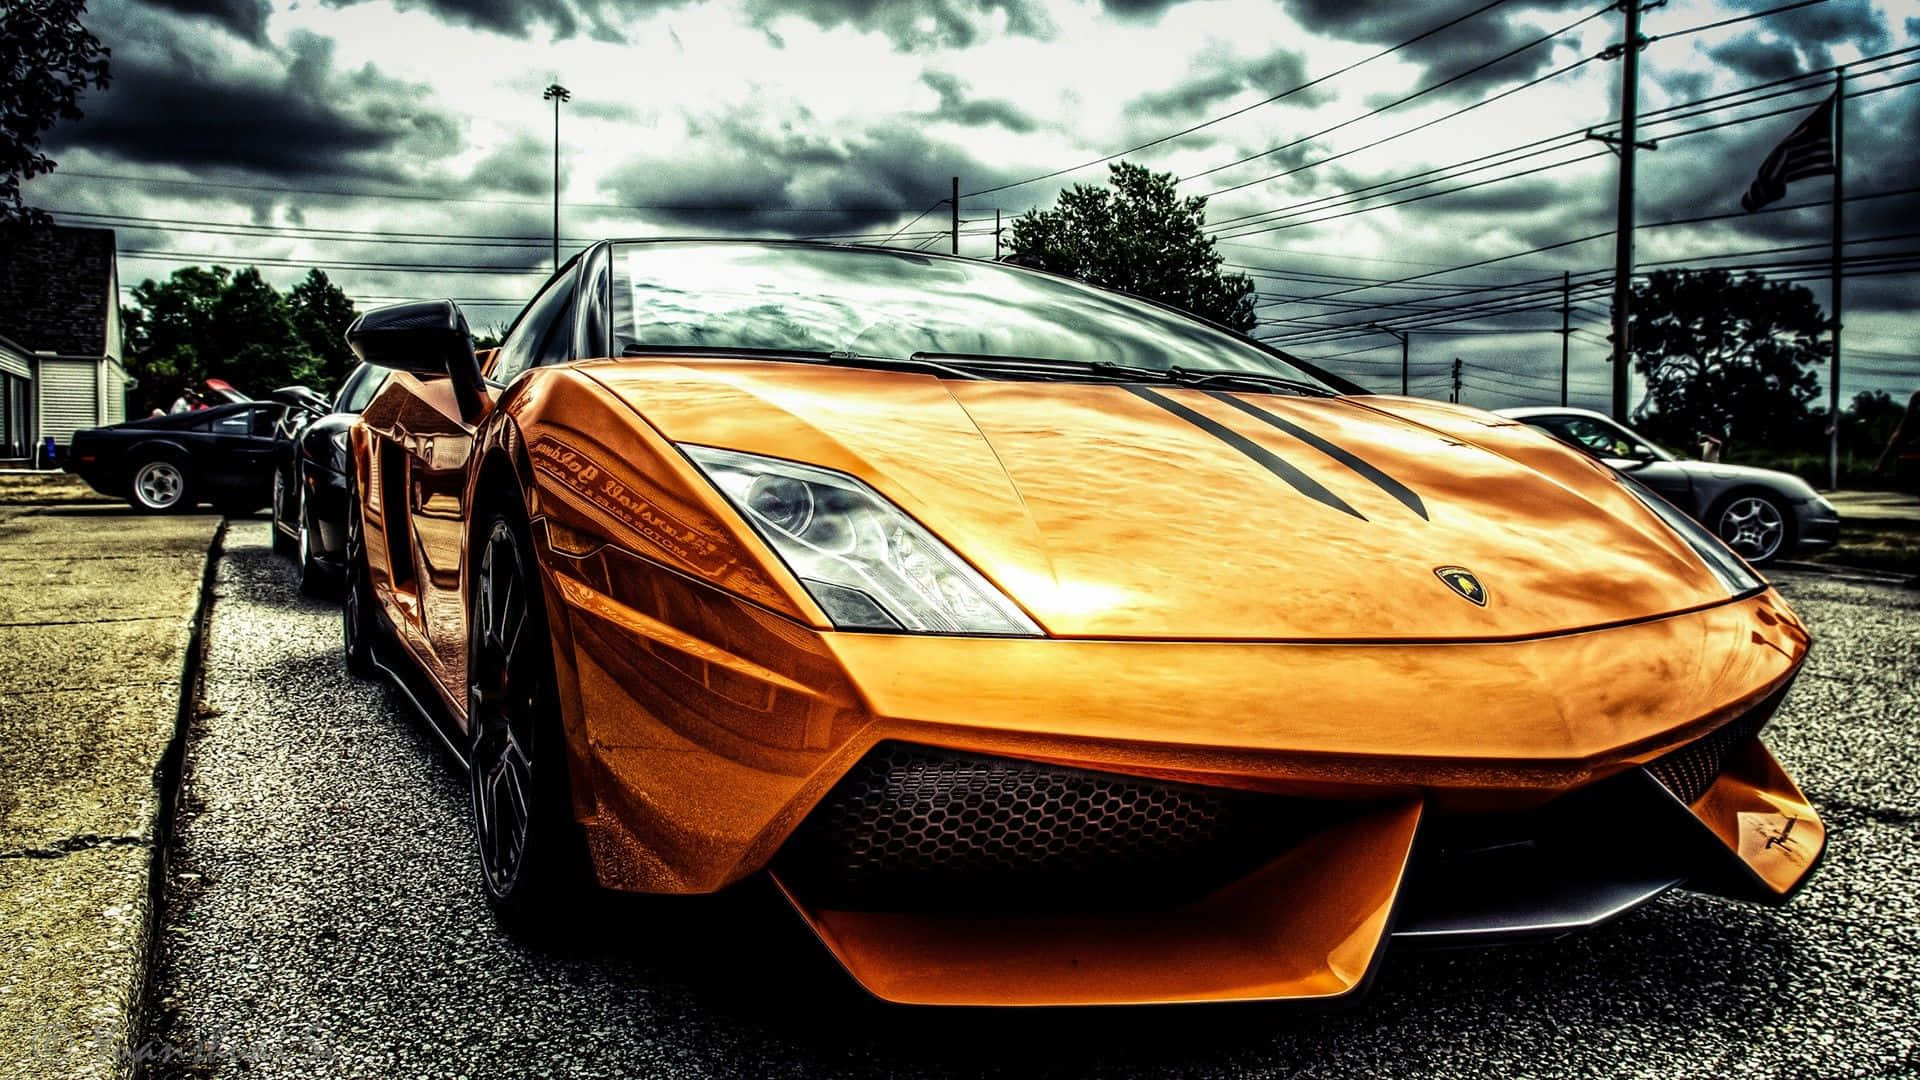 Gold Lamborghini stands out on the road Wallpaper